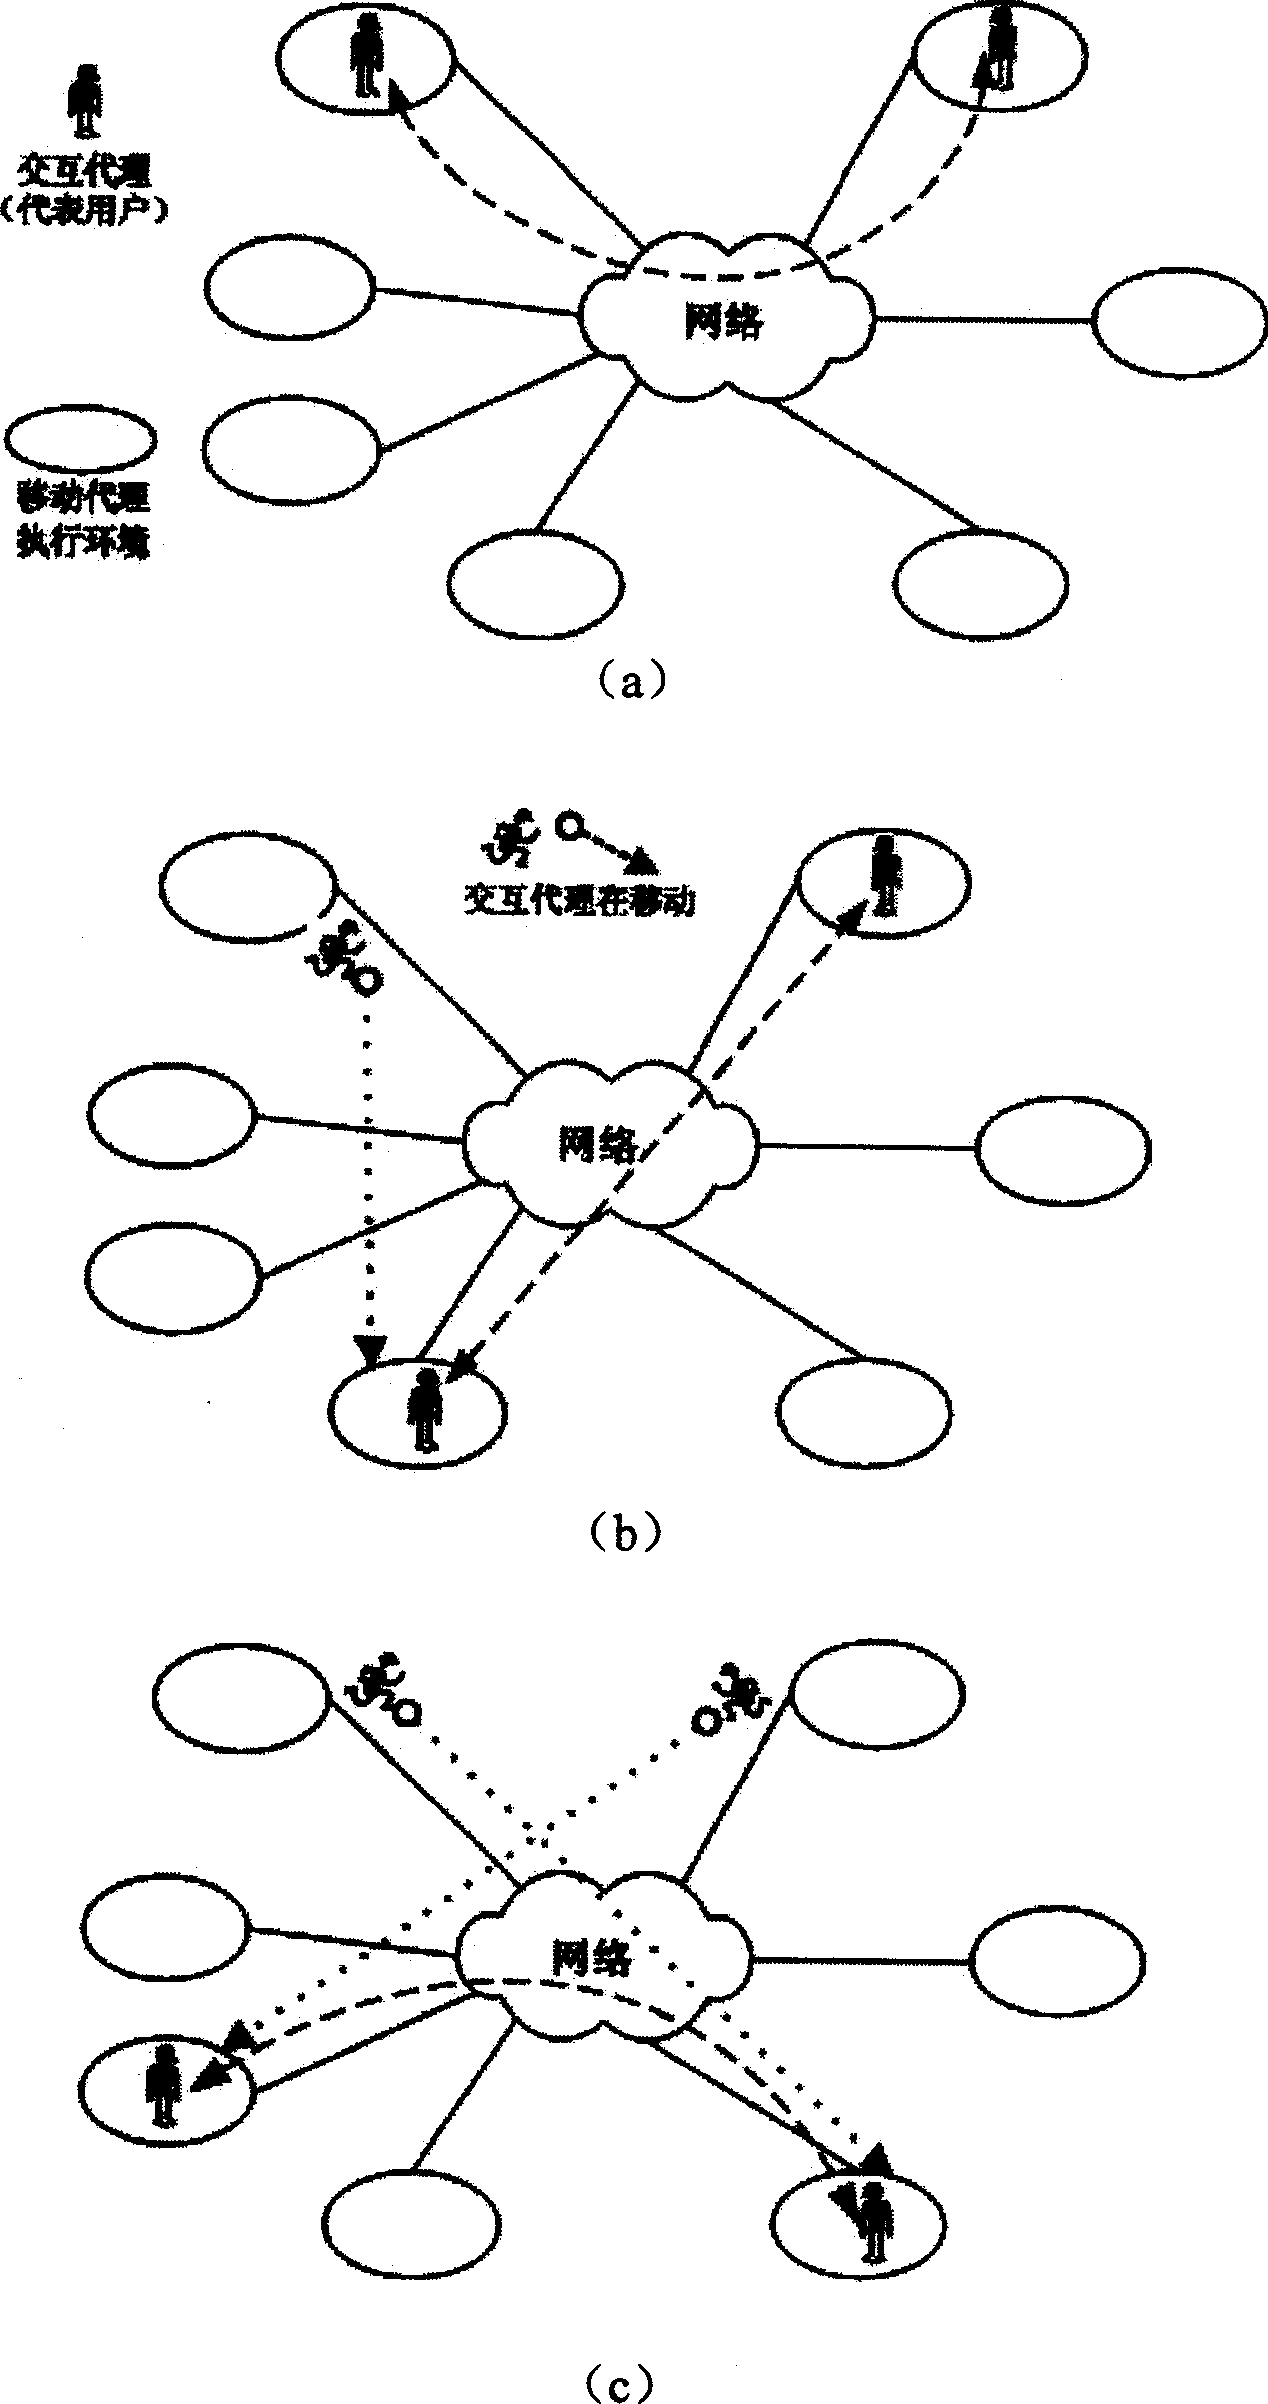 Mobile agent based network distributed interacting method